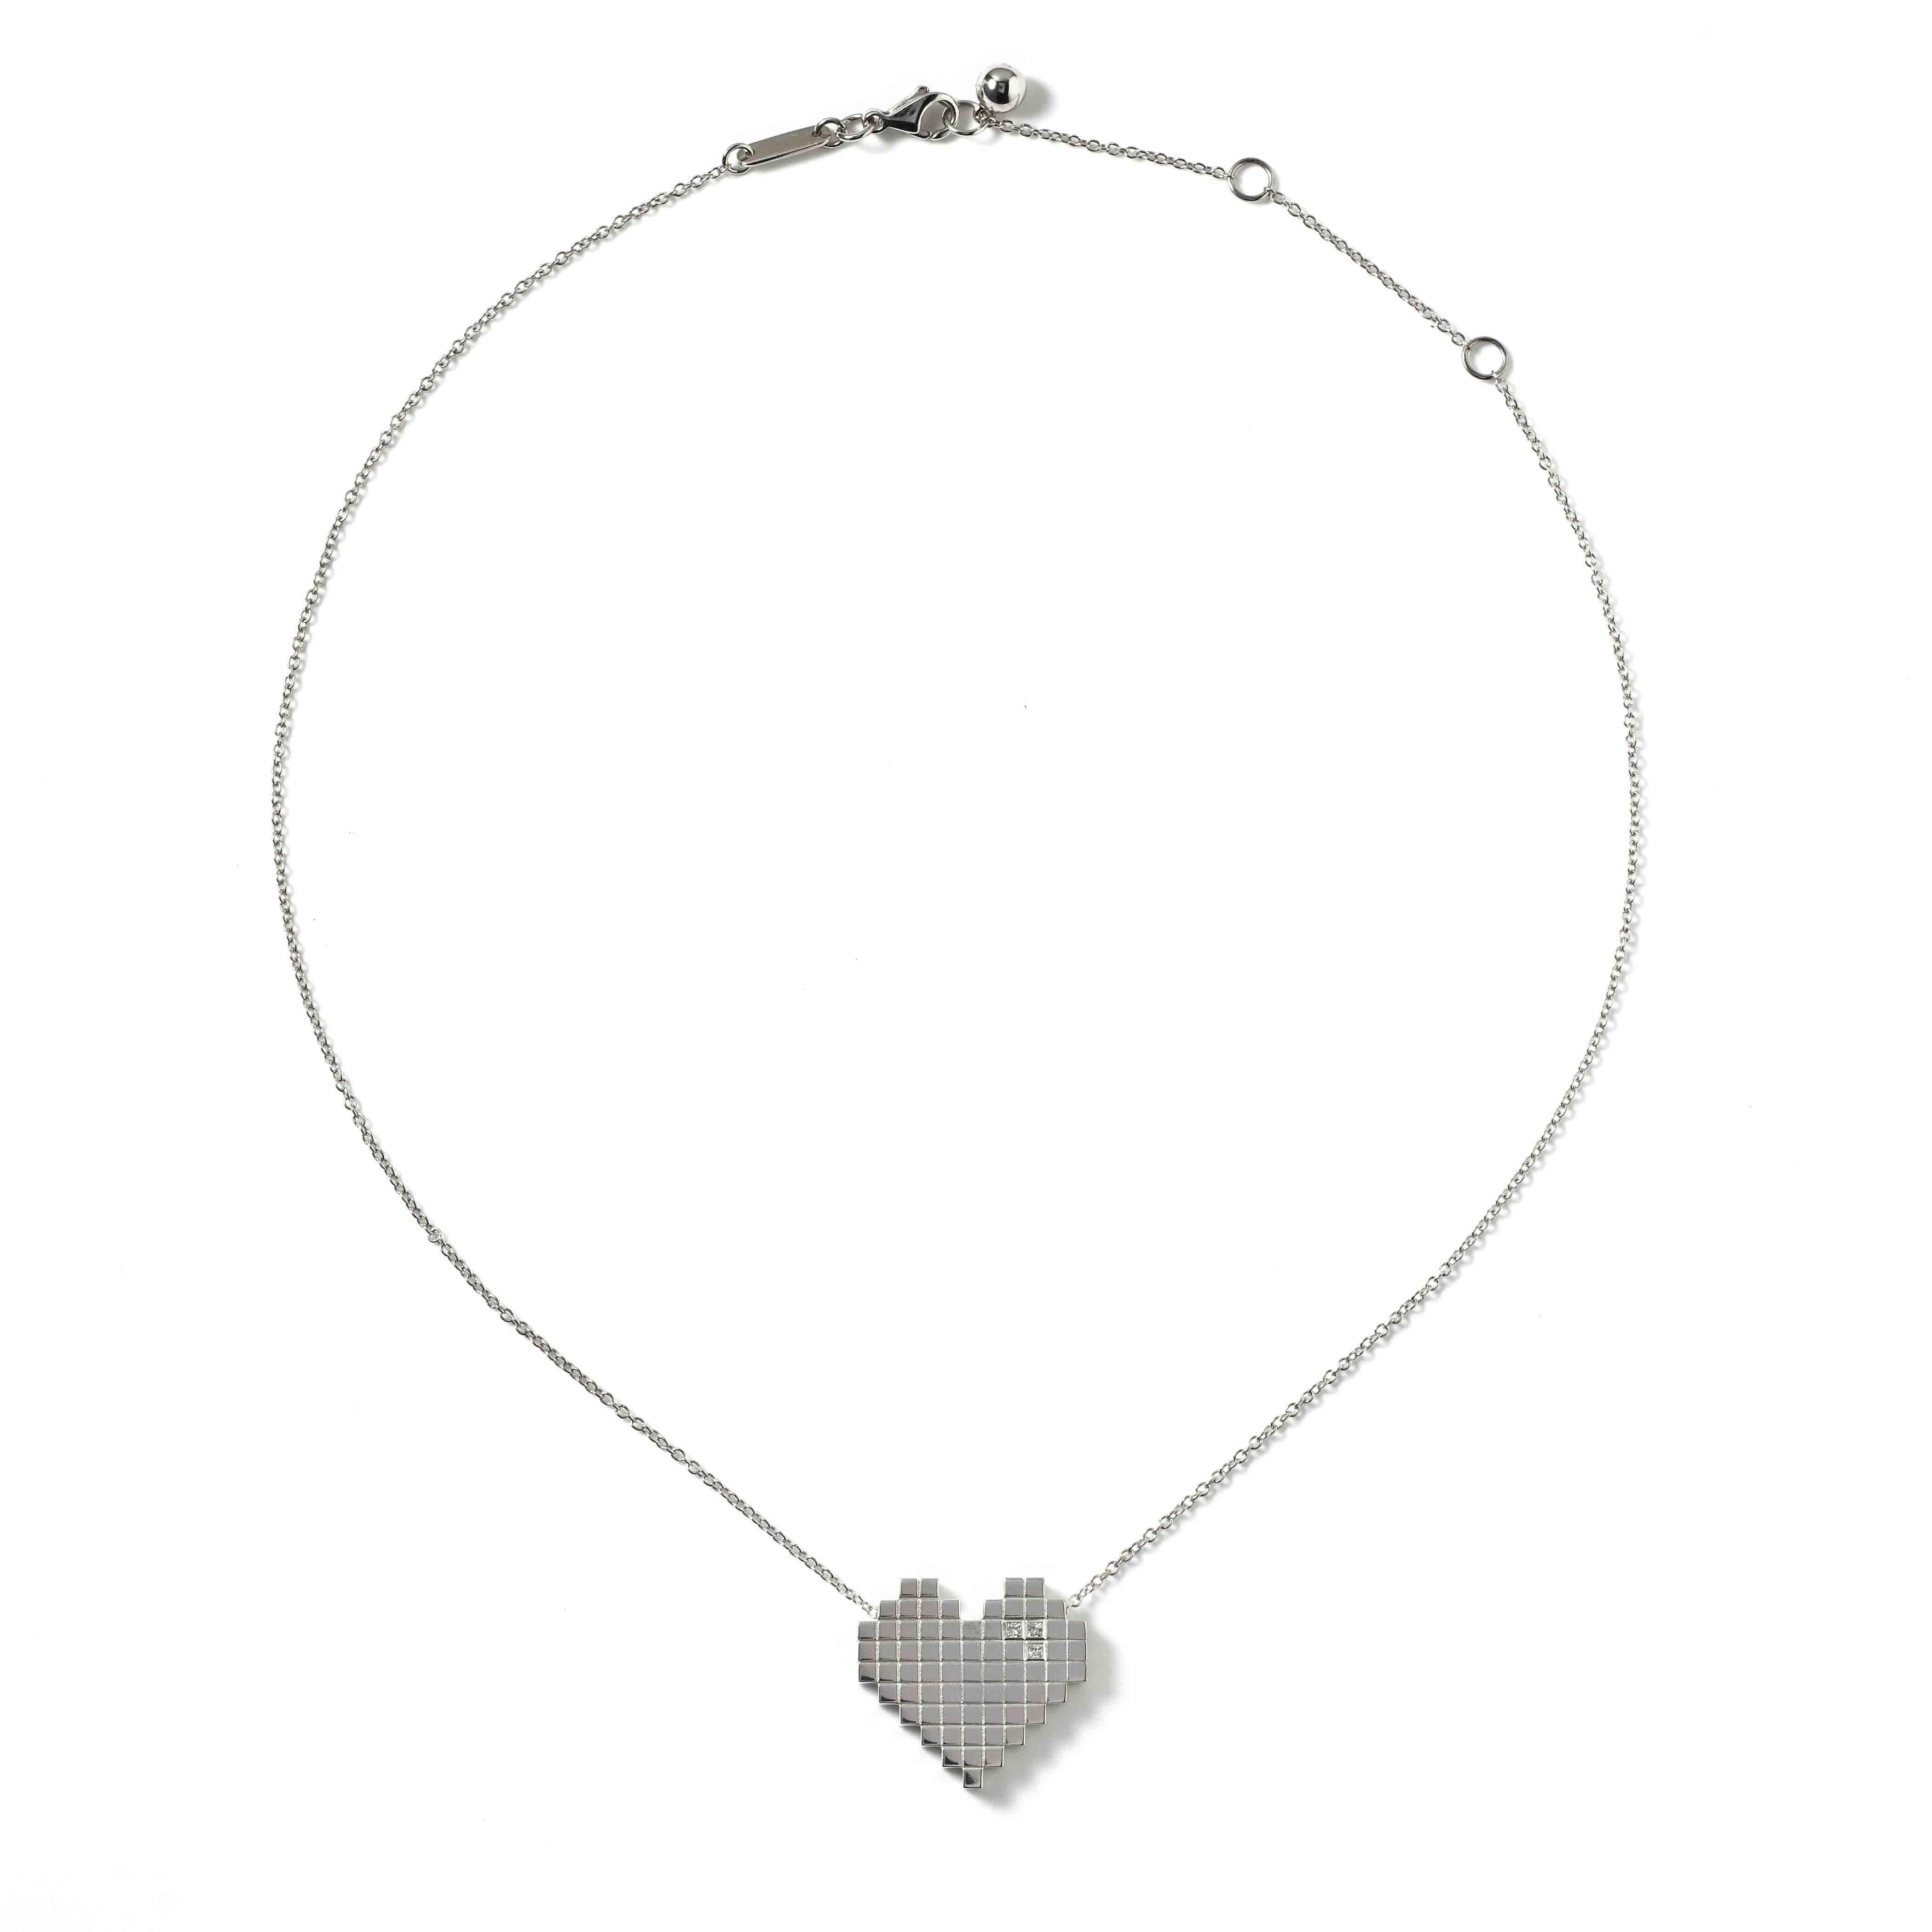 White Gold and Diamond Pixel Heart Necklace by Francesca Grima 

18ct. White Gold set with 3 Diamonds on White Gold Chain.

・Polished 18ct. White Gold
・3 Princess-cut Diamonds (0.05cts)
・Pendant length: 2cm
・Pendant width; 2.1cm
・Chain can be worn